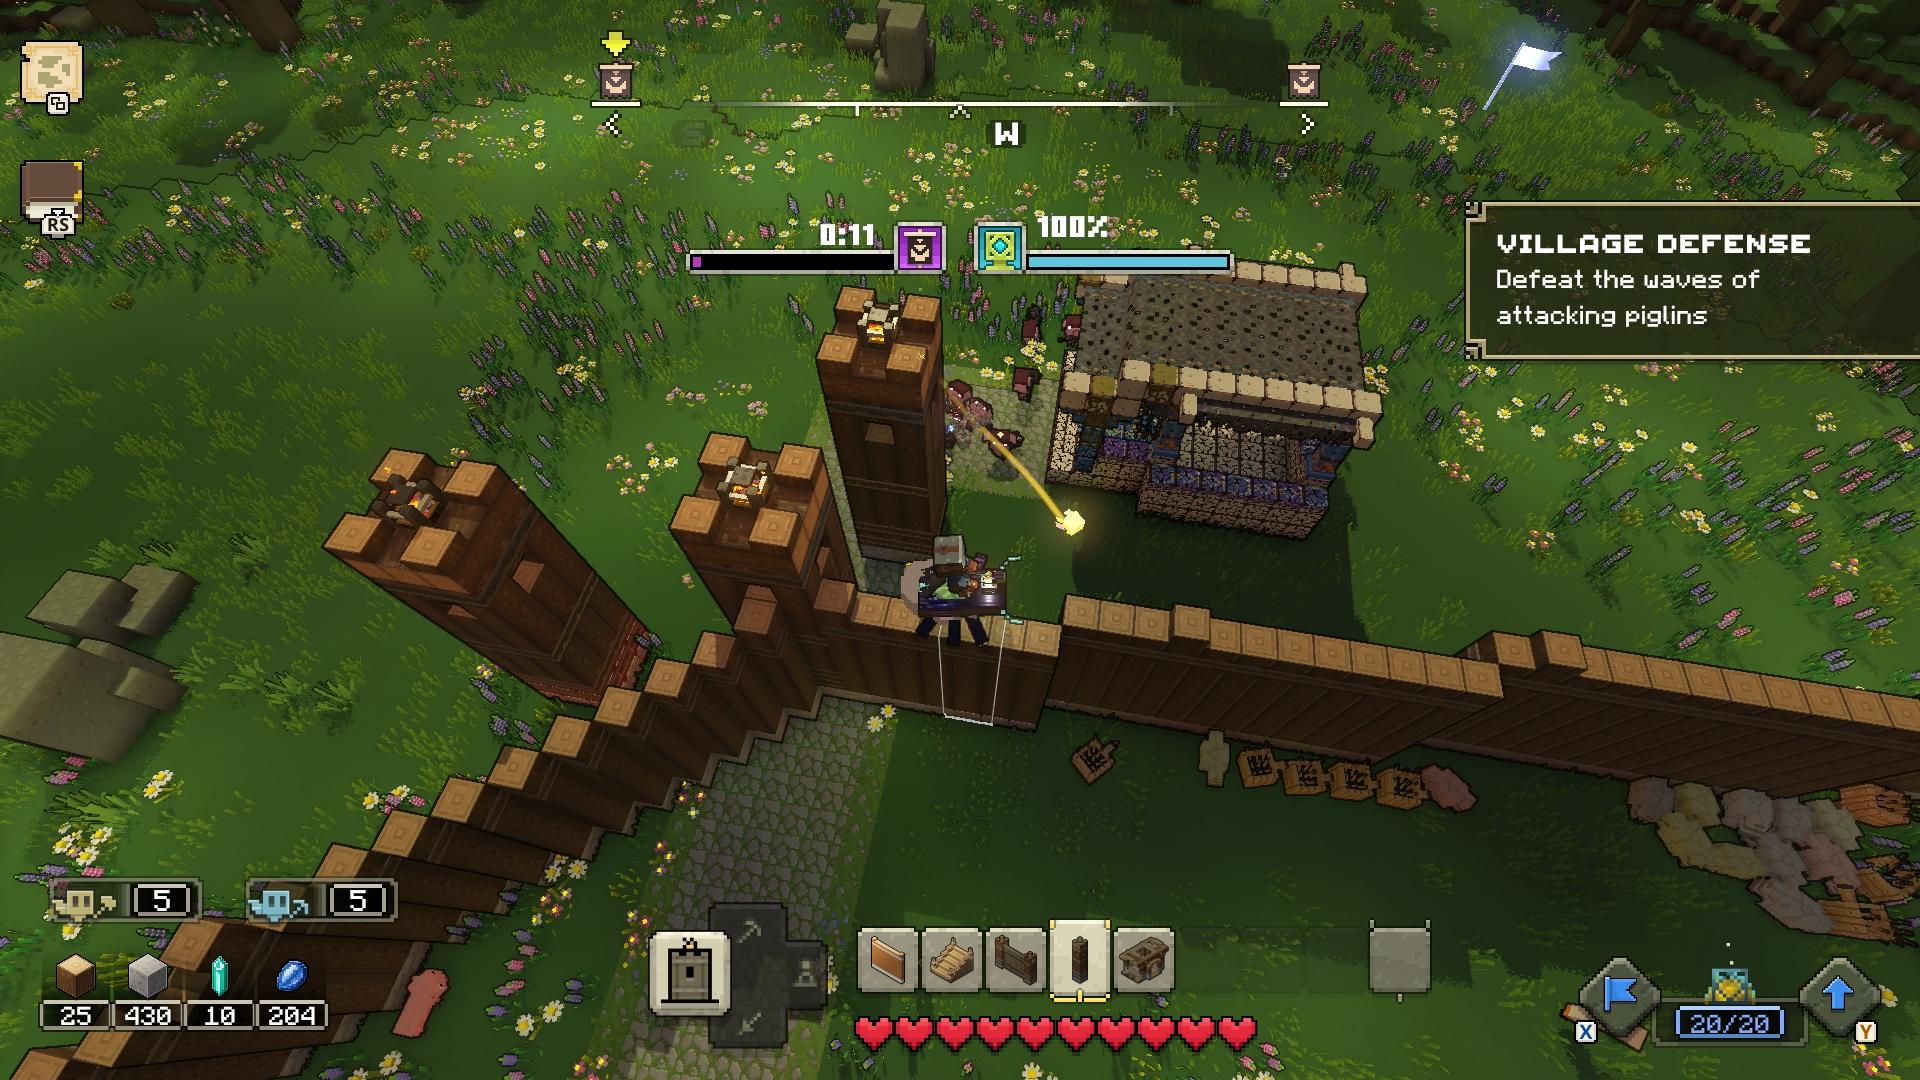 Minecraft Legends is a curious and charming blend of adventure and